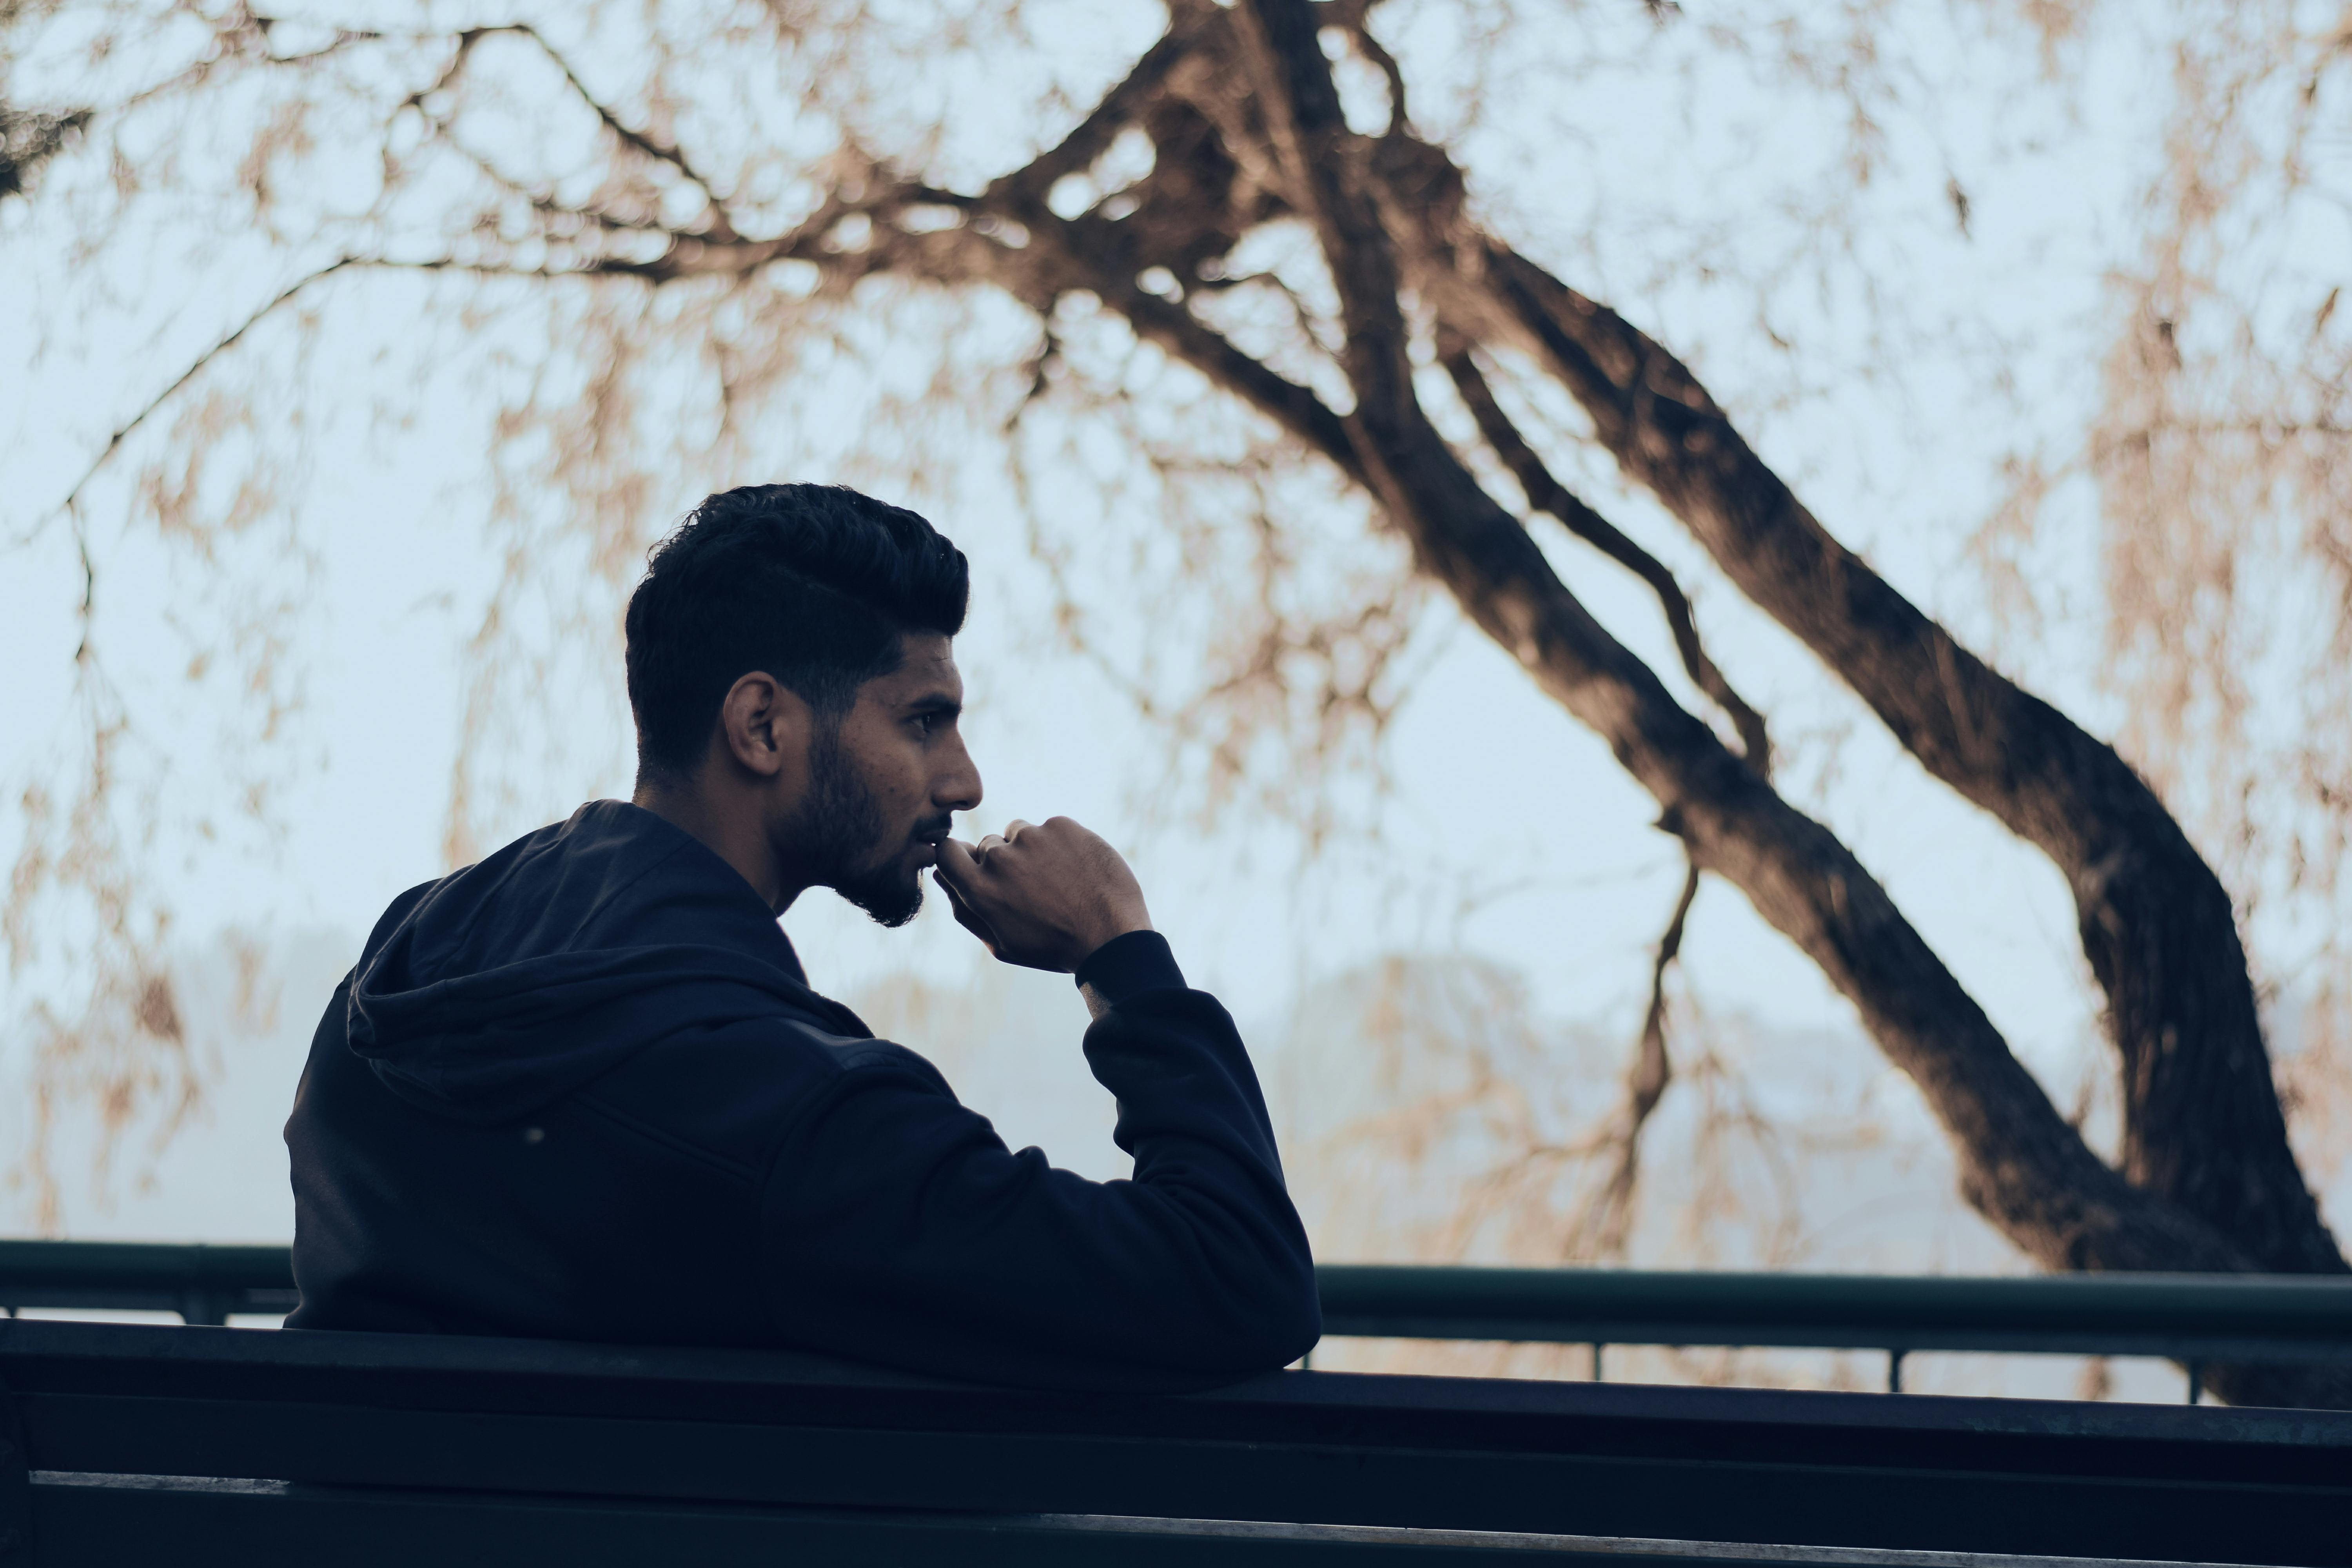 A man in sitting on a bench near trees | Source: Pexels